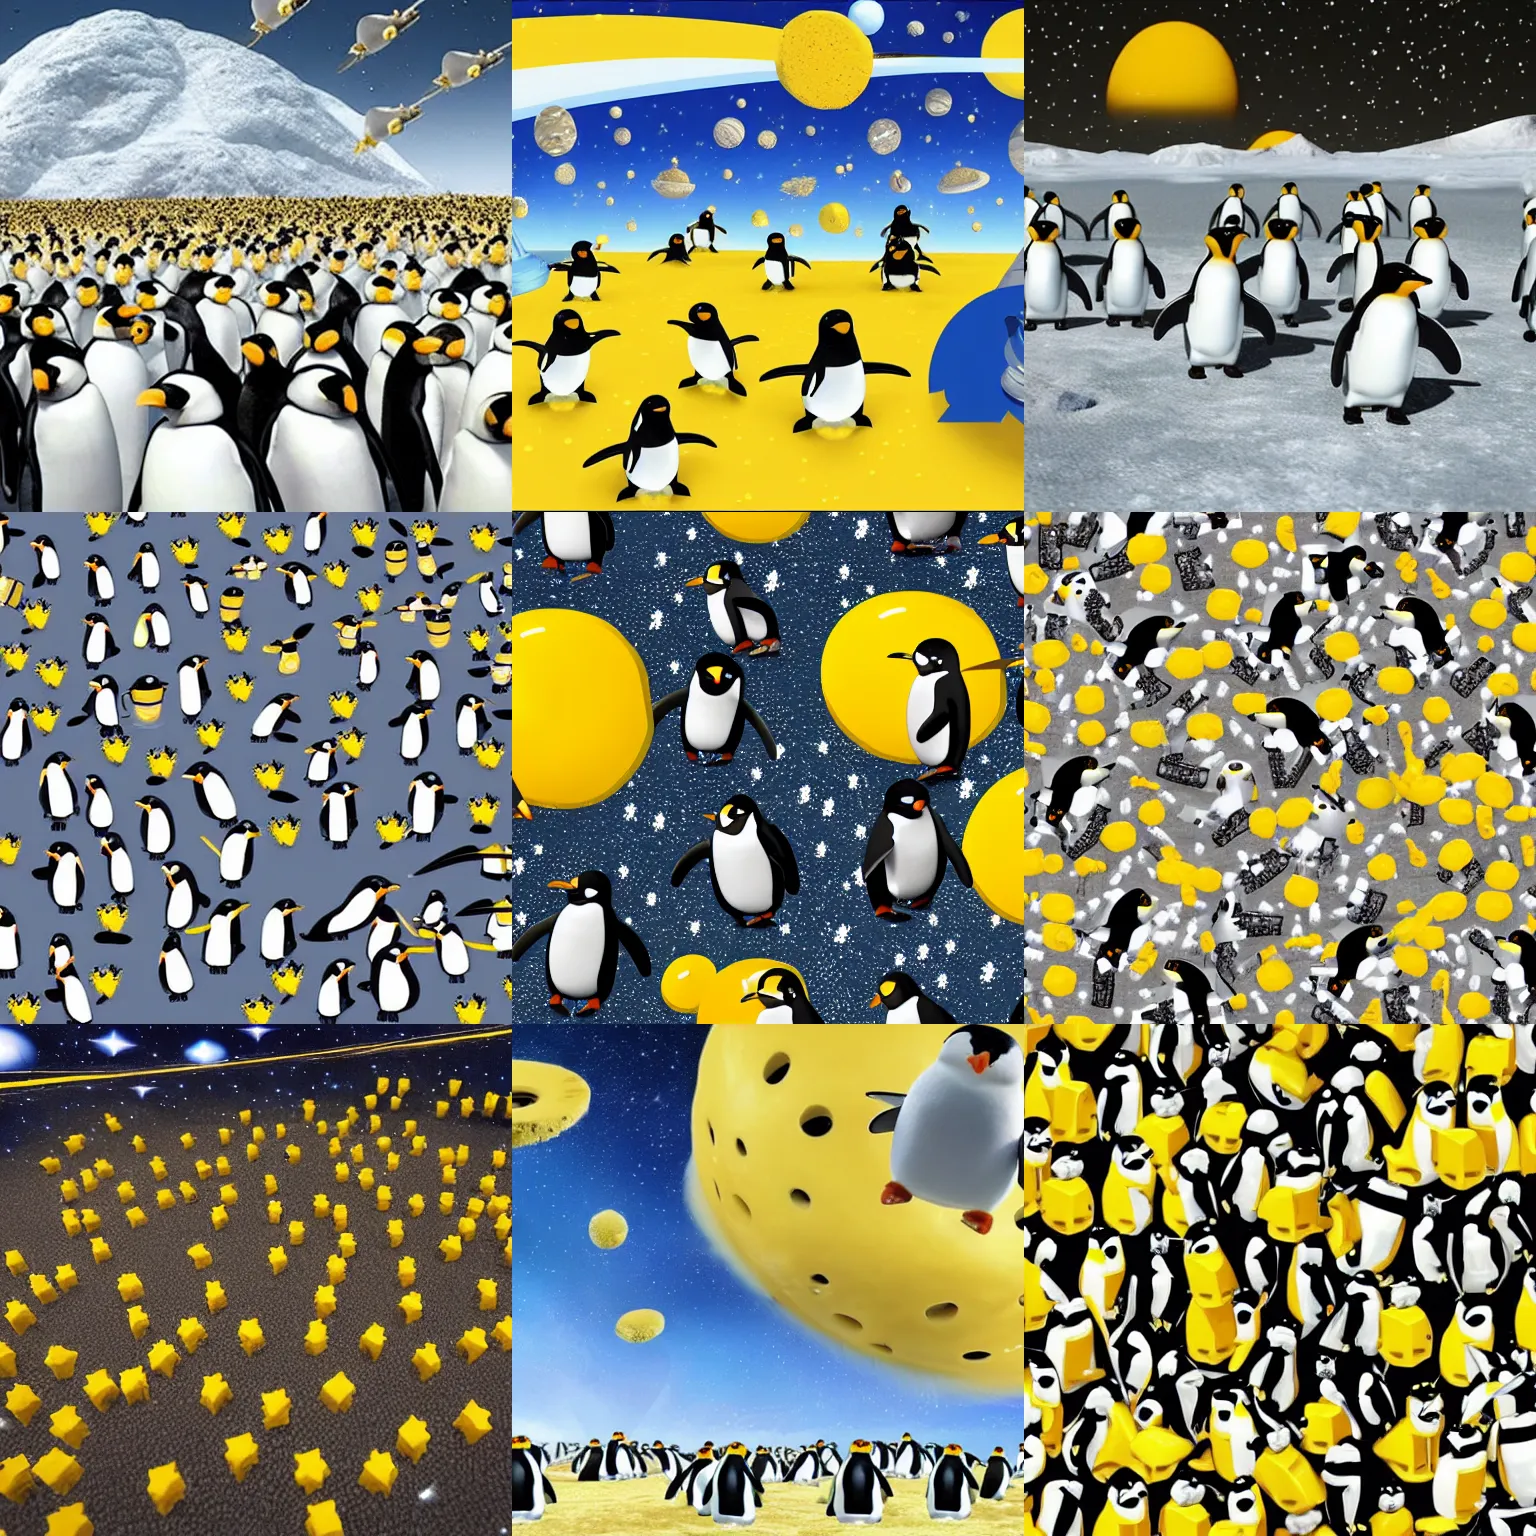 Prompt: planet made of yellow swiss cheese in space, army of robotic penguins, soldier penguins, invasion, hyper-realistic